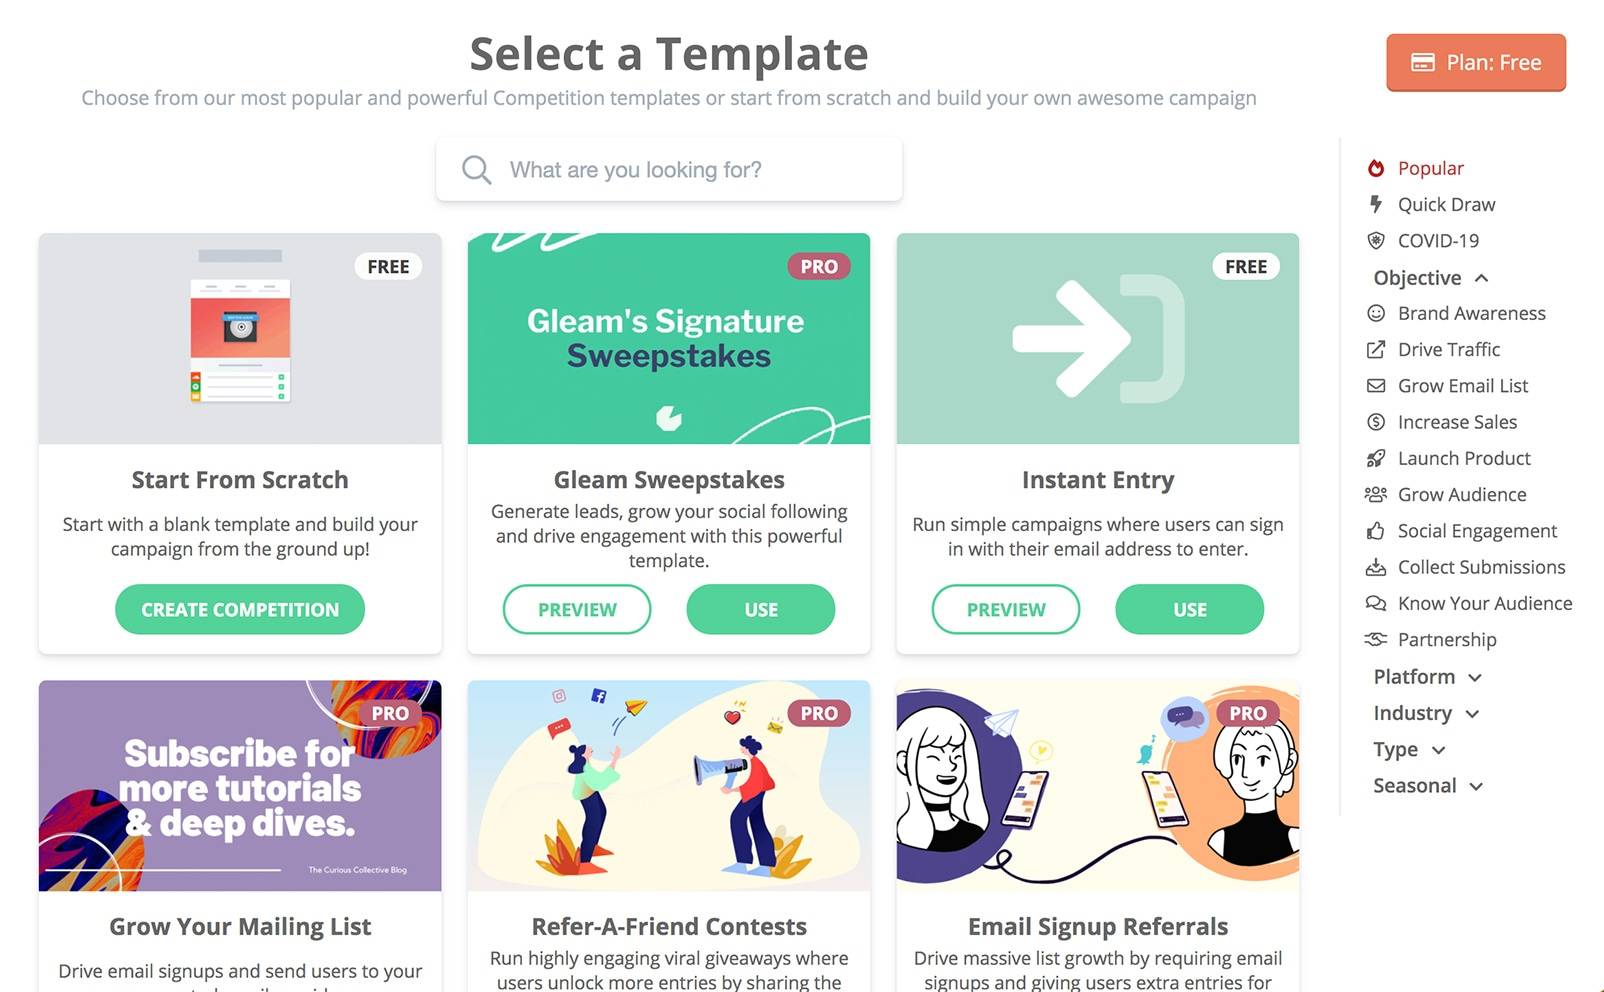 Gleam's Competition Templates Library